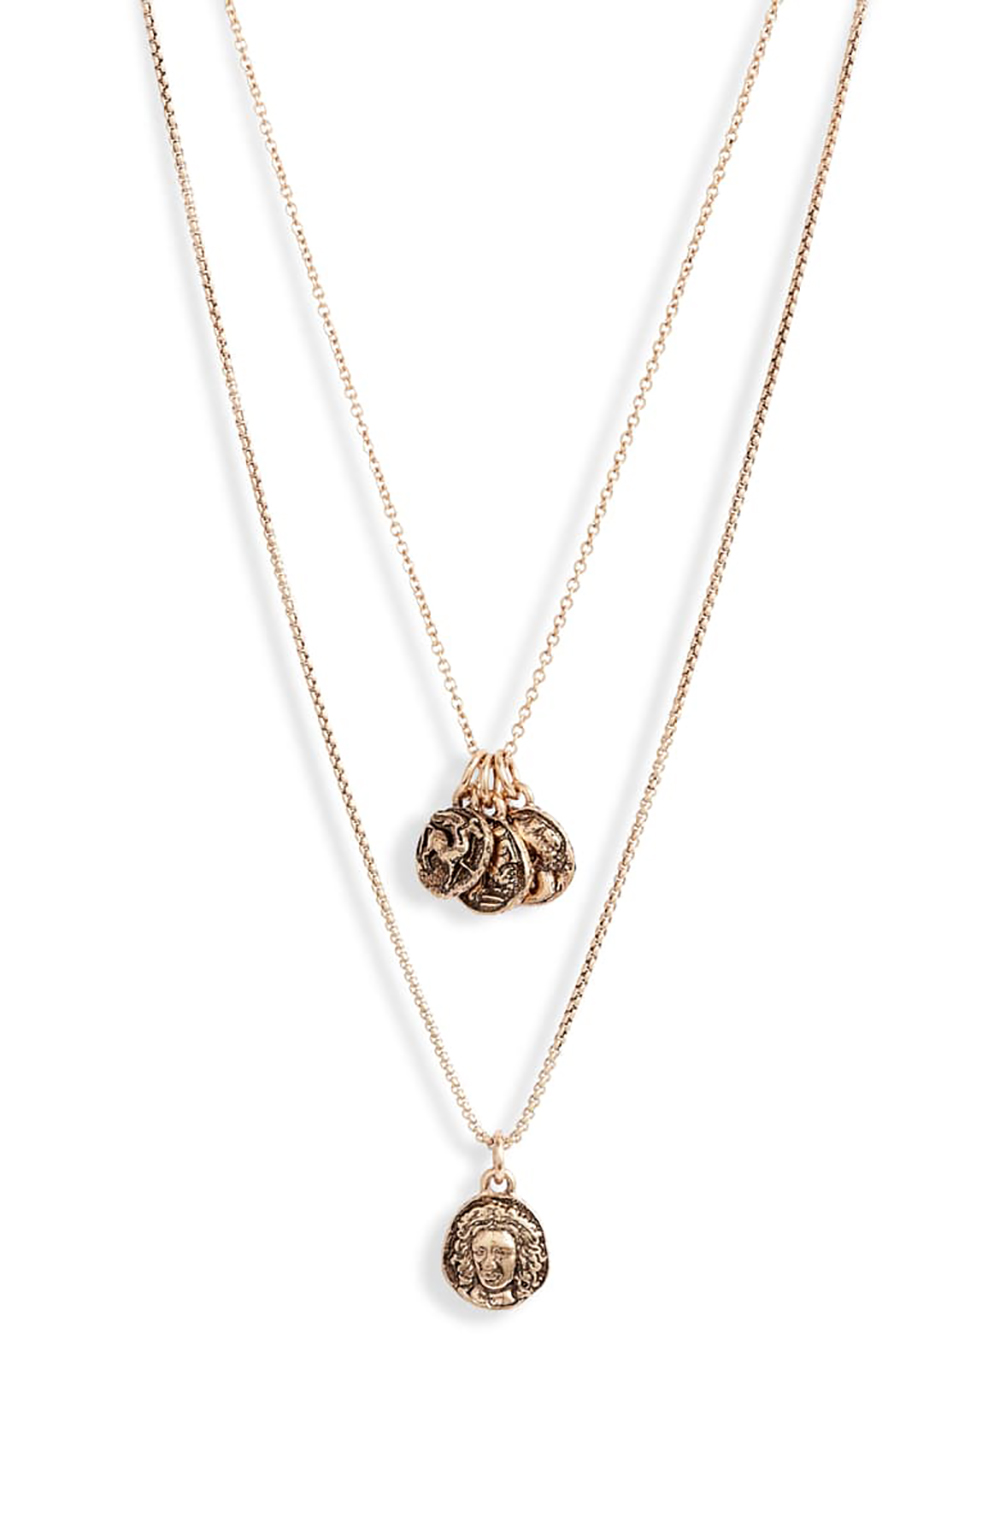 Knotty Astrological Charm Layered Necklace